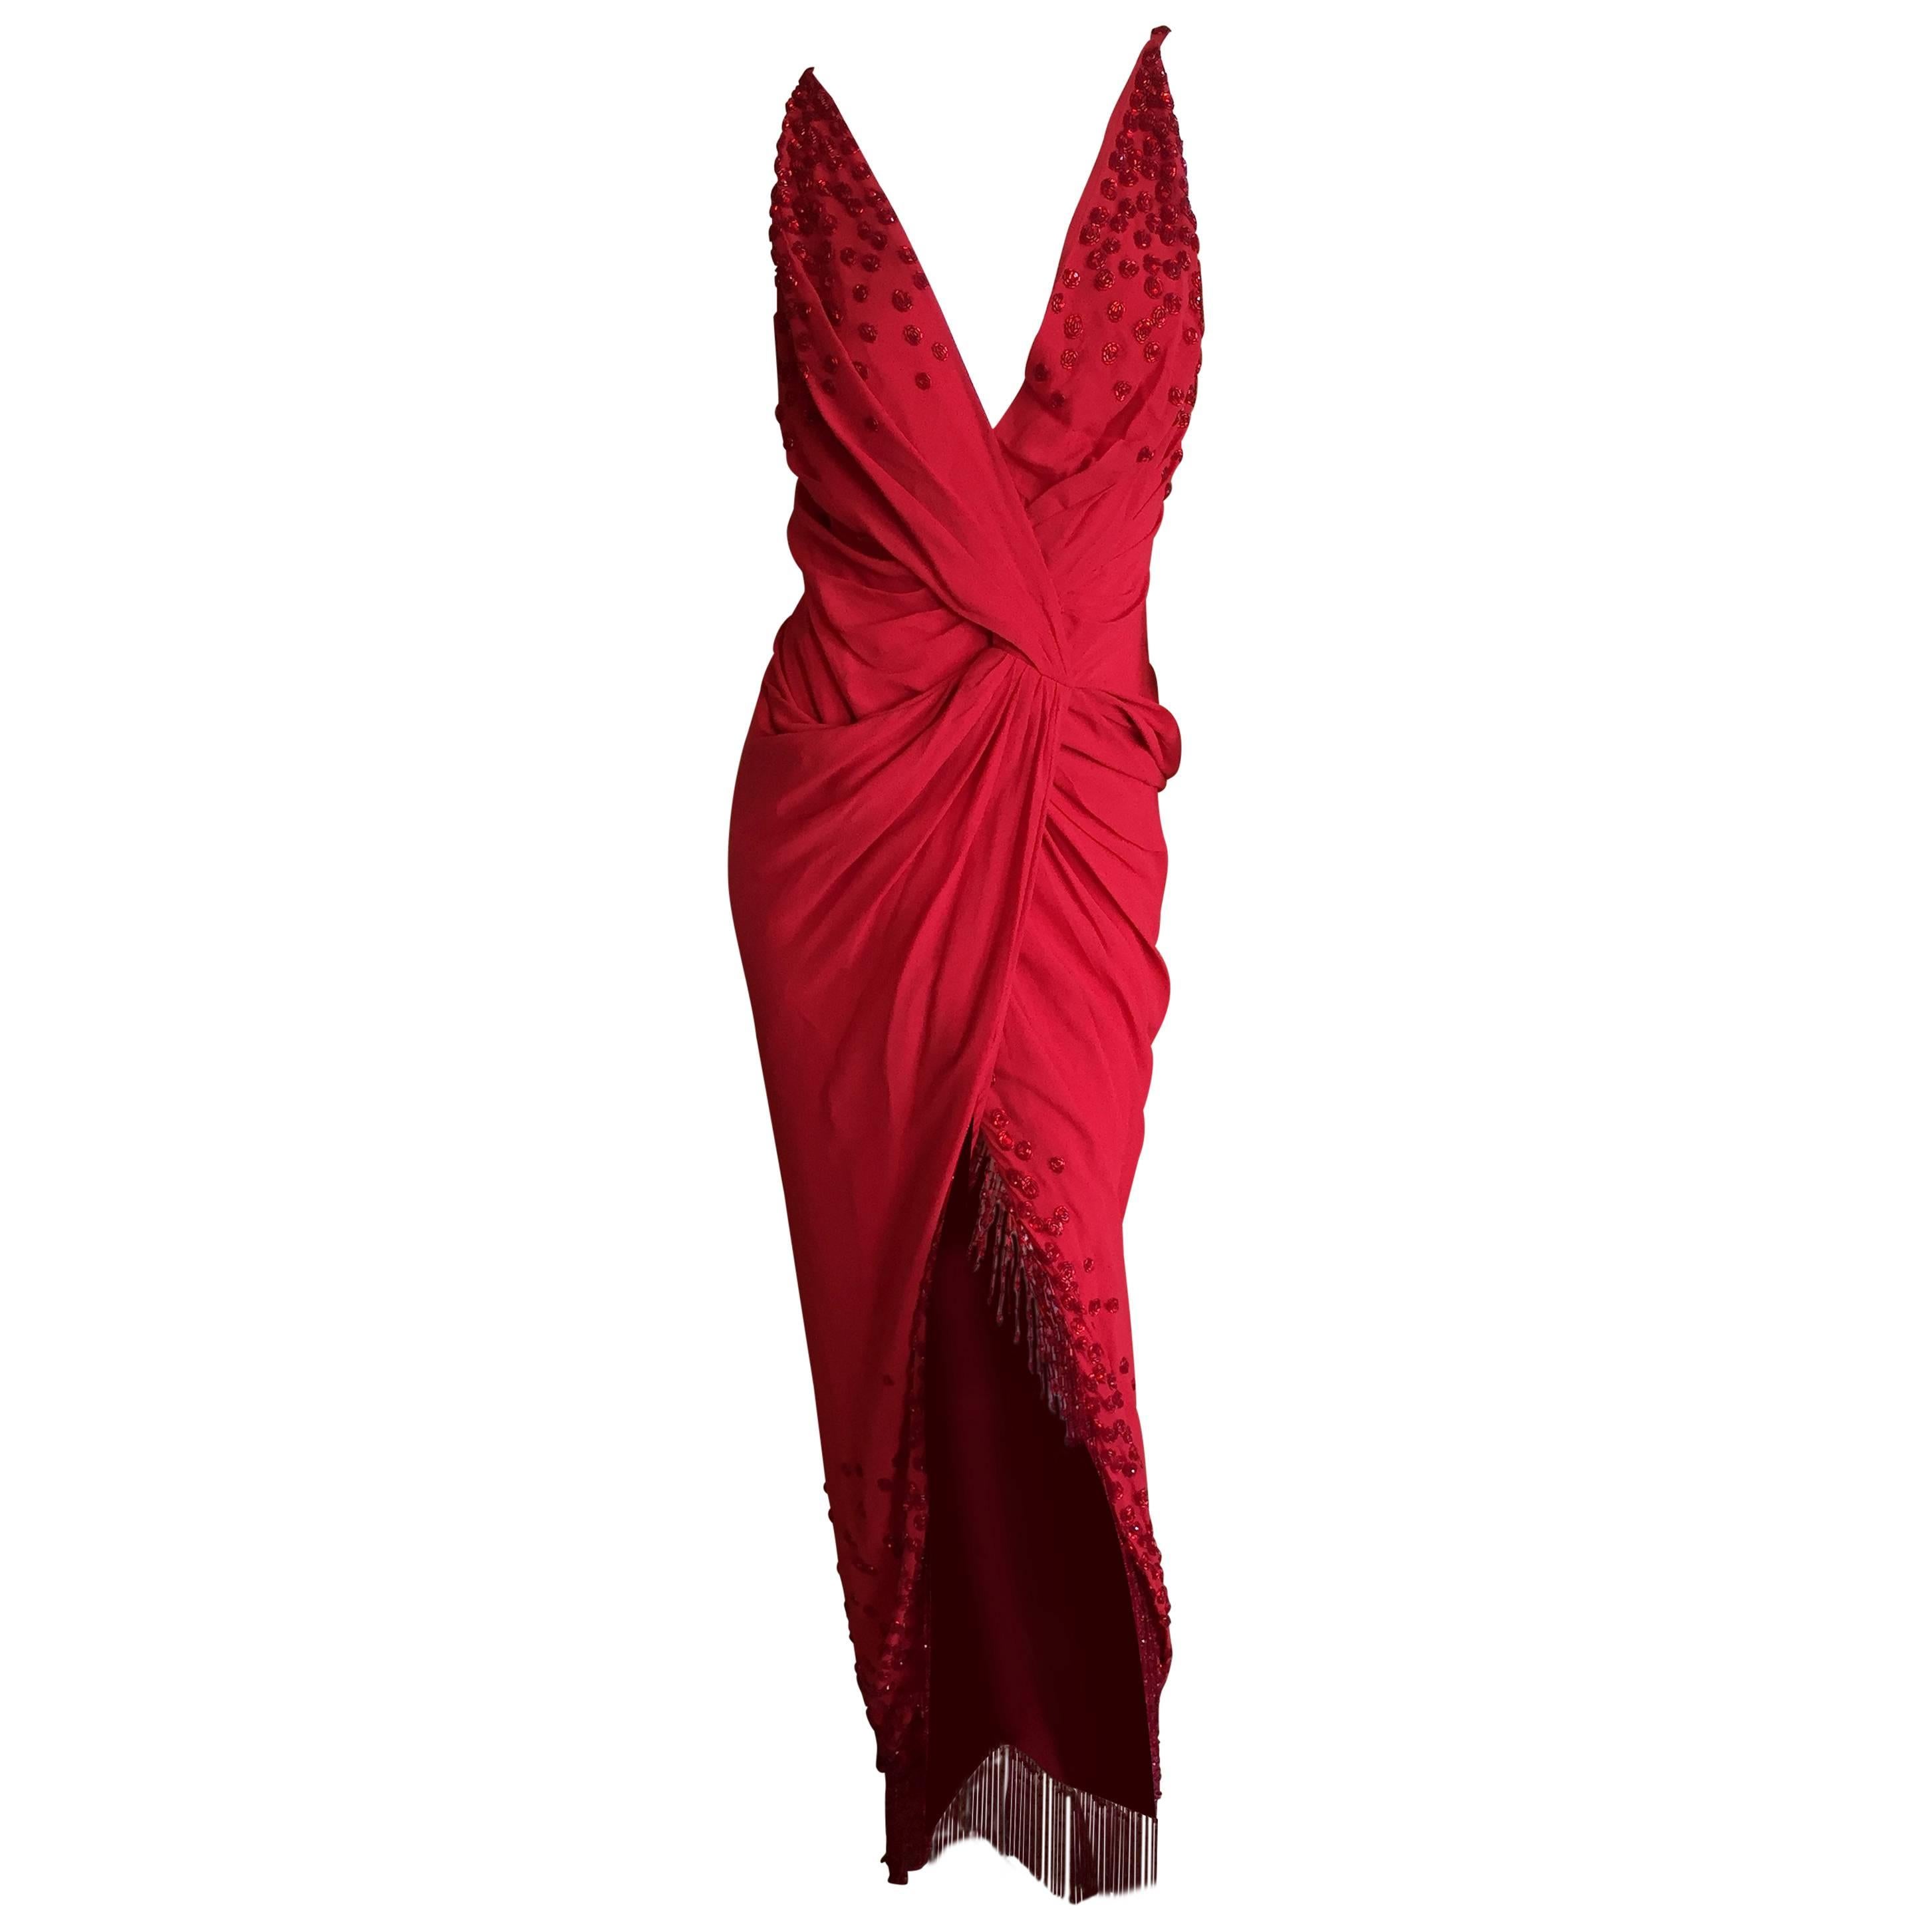 Christian Dior Lady in Red Fringed Beaded Evening Dress by Galliano